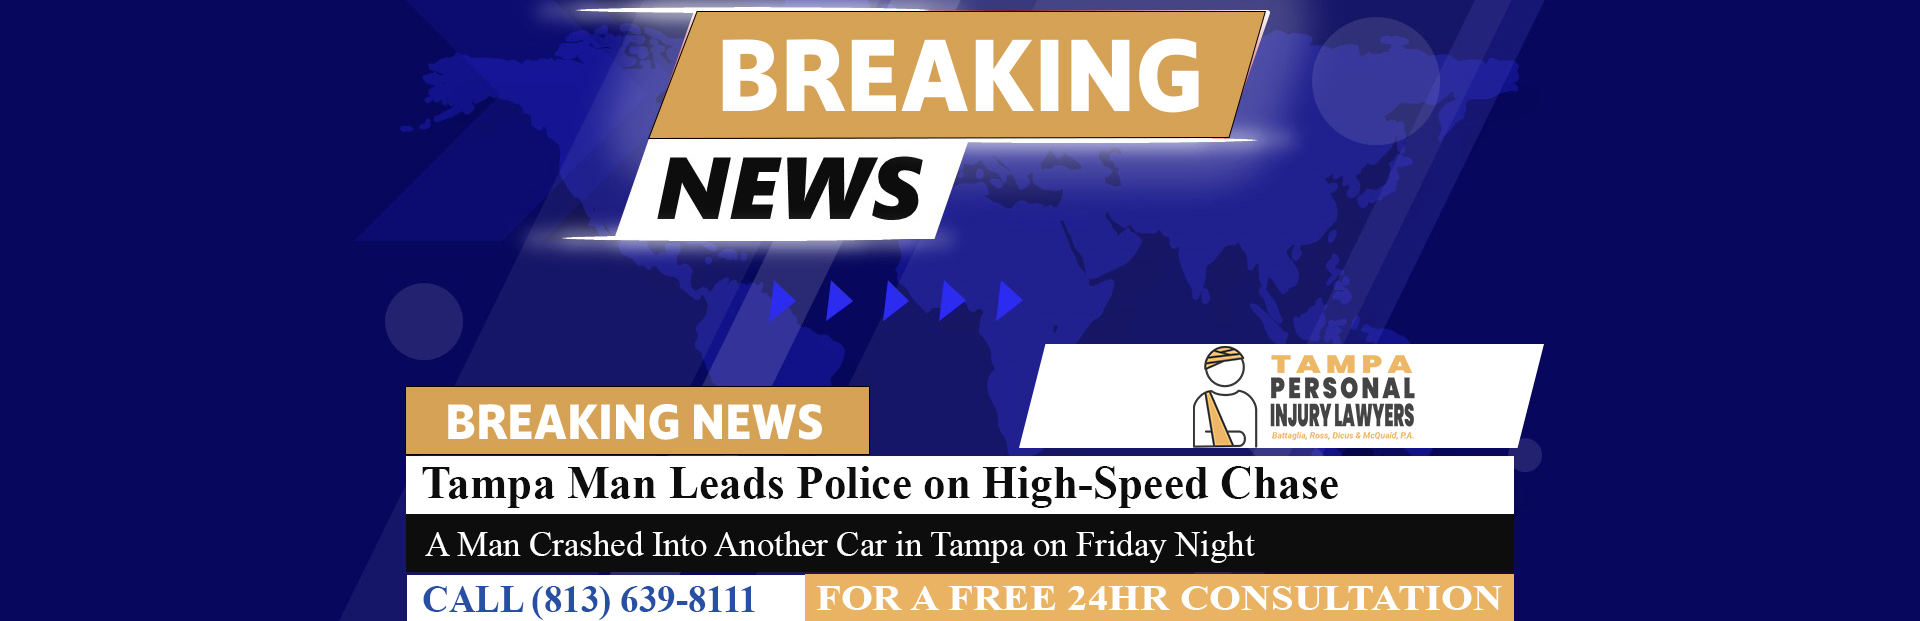 [06-22-24] Tampa Man With Suspended License Steals Car While on Drugs, Leads Police on High-Speed Chase Before Crashing